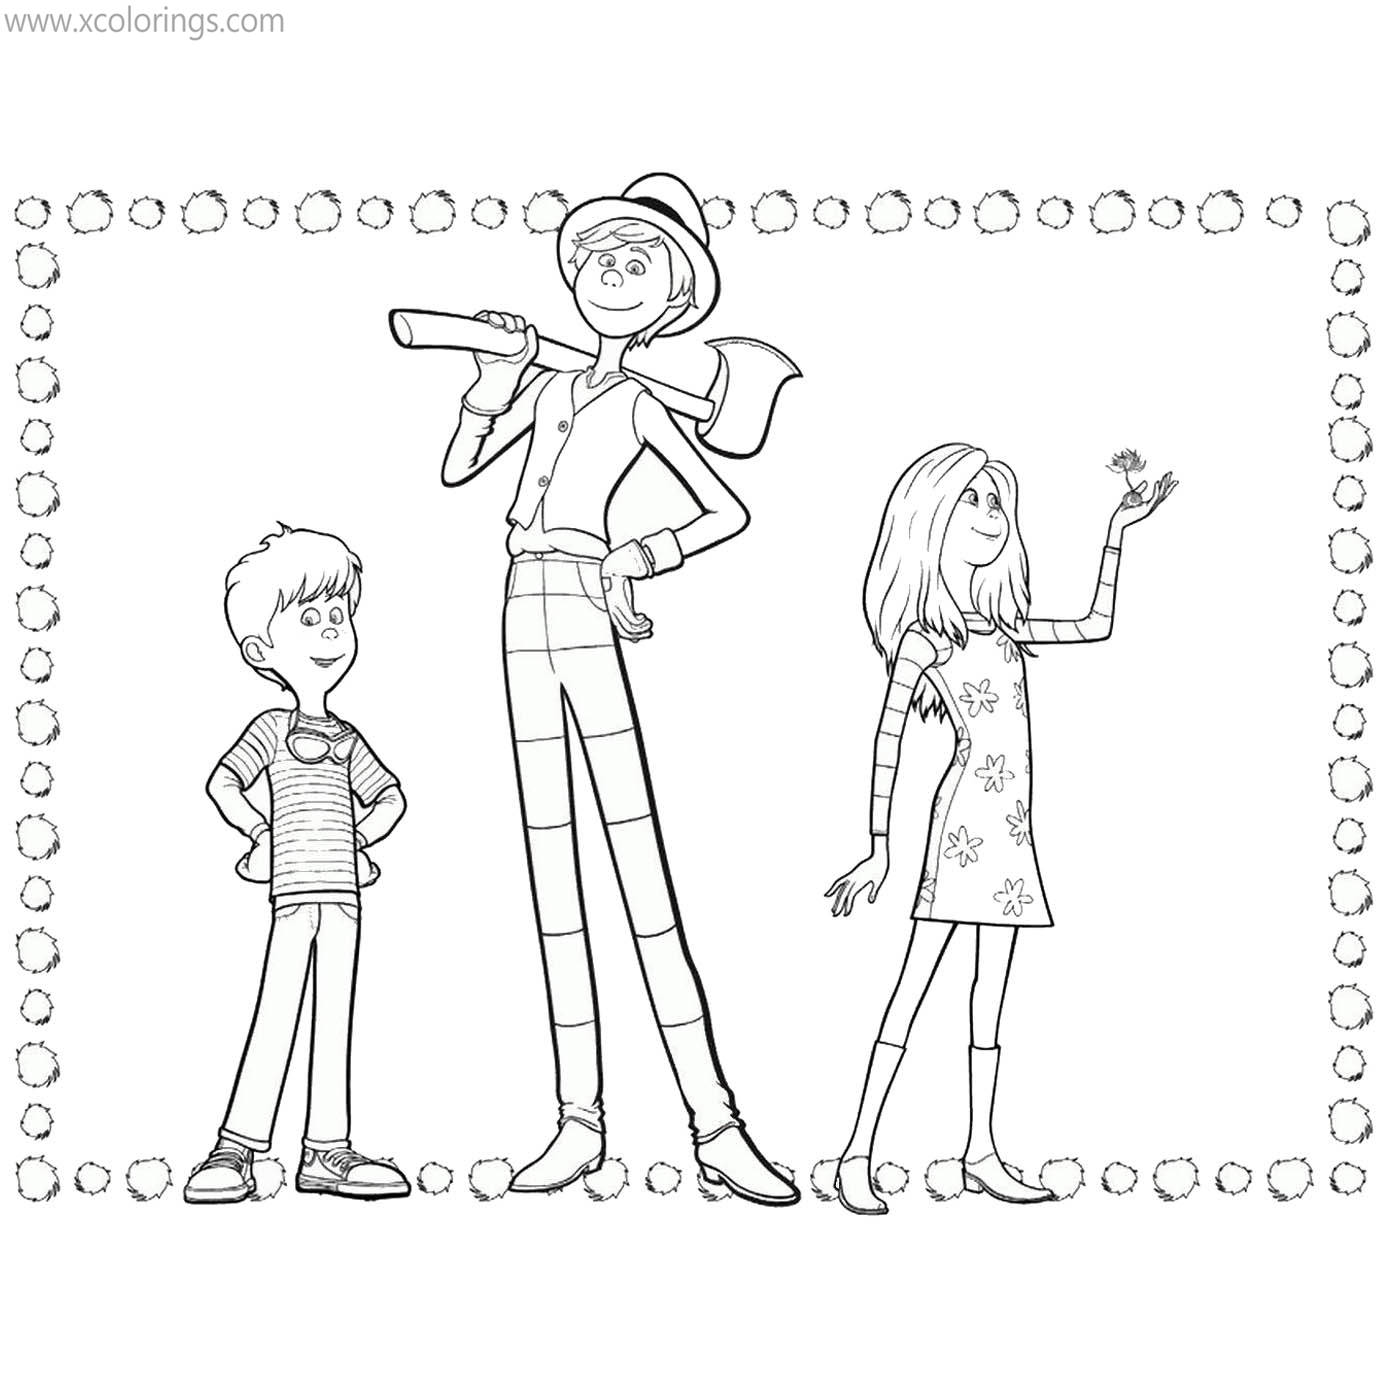 Free Lorax Coloring Pages Characters Once ler Audrey and Ted printable